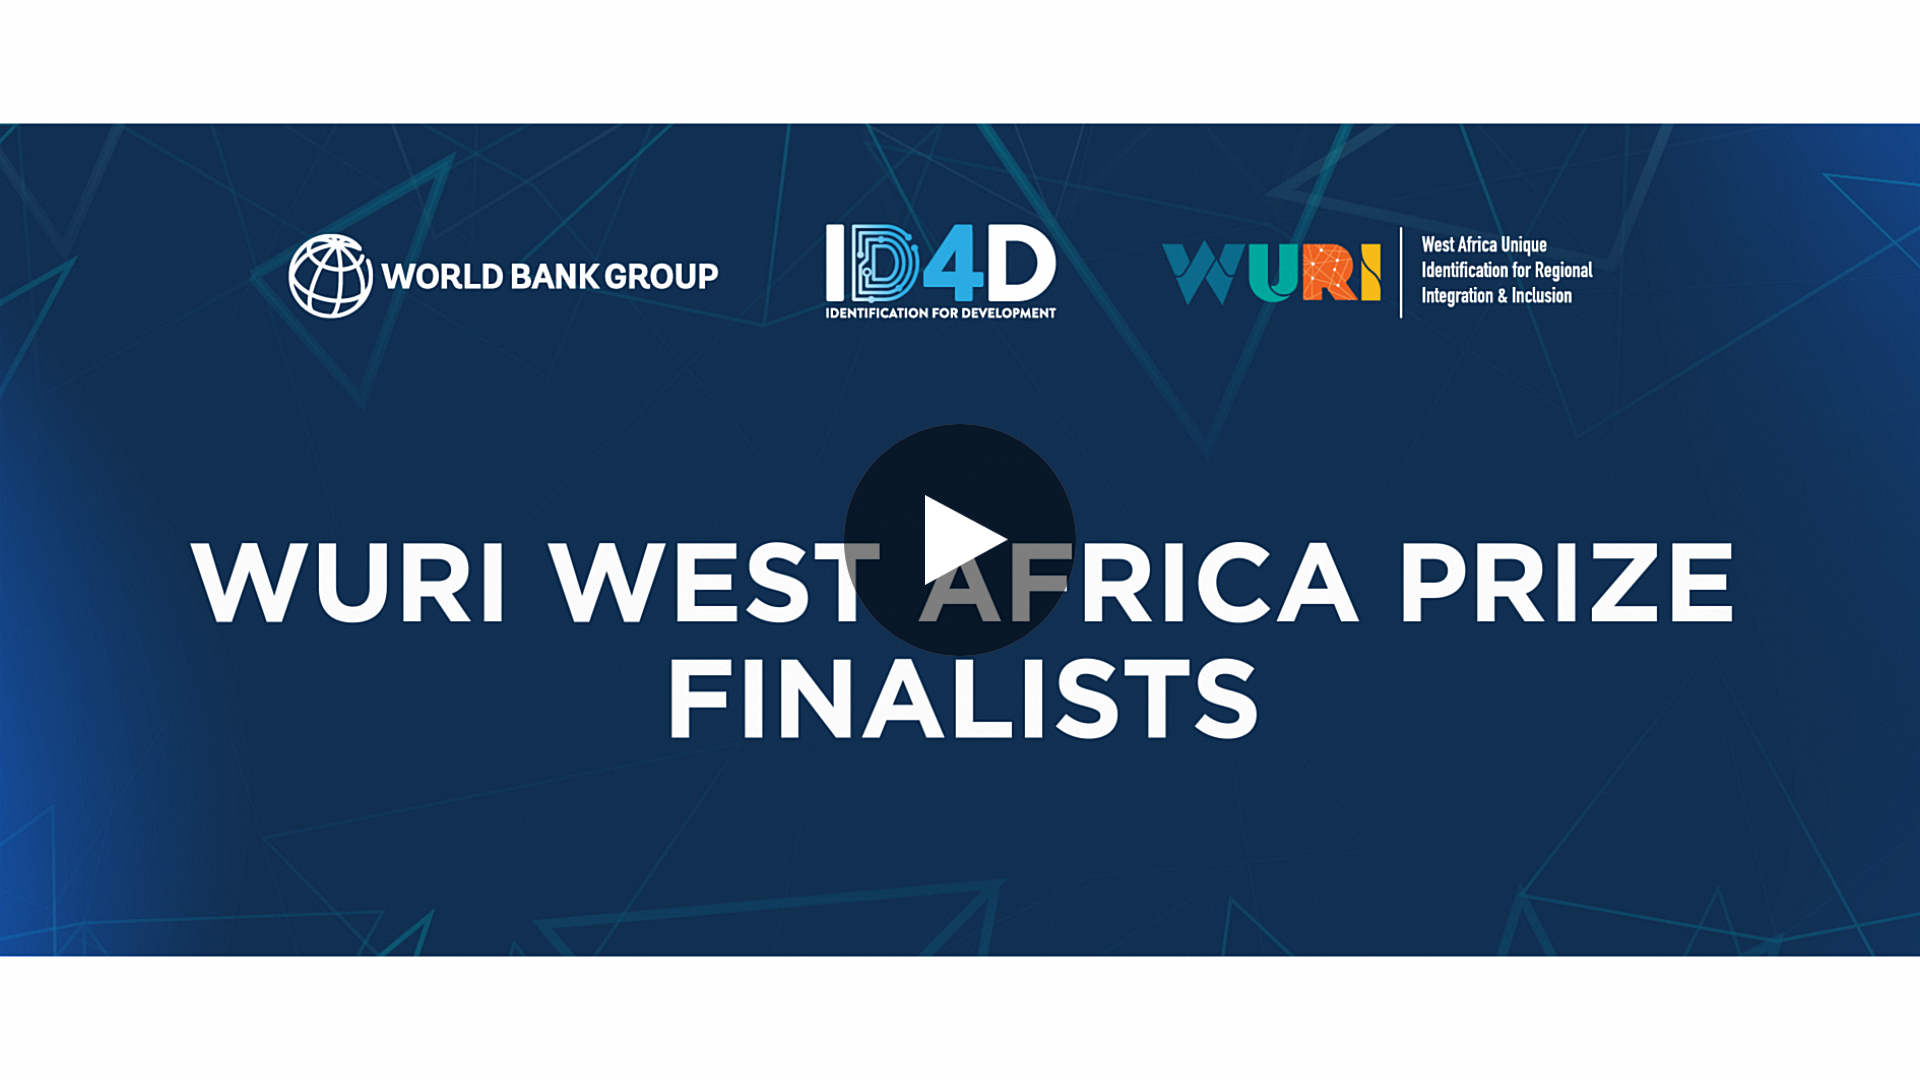 WURI West Africa Prize Highlights